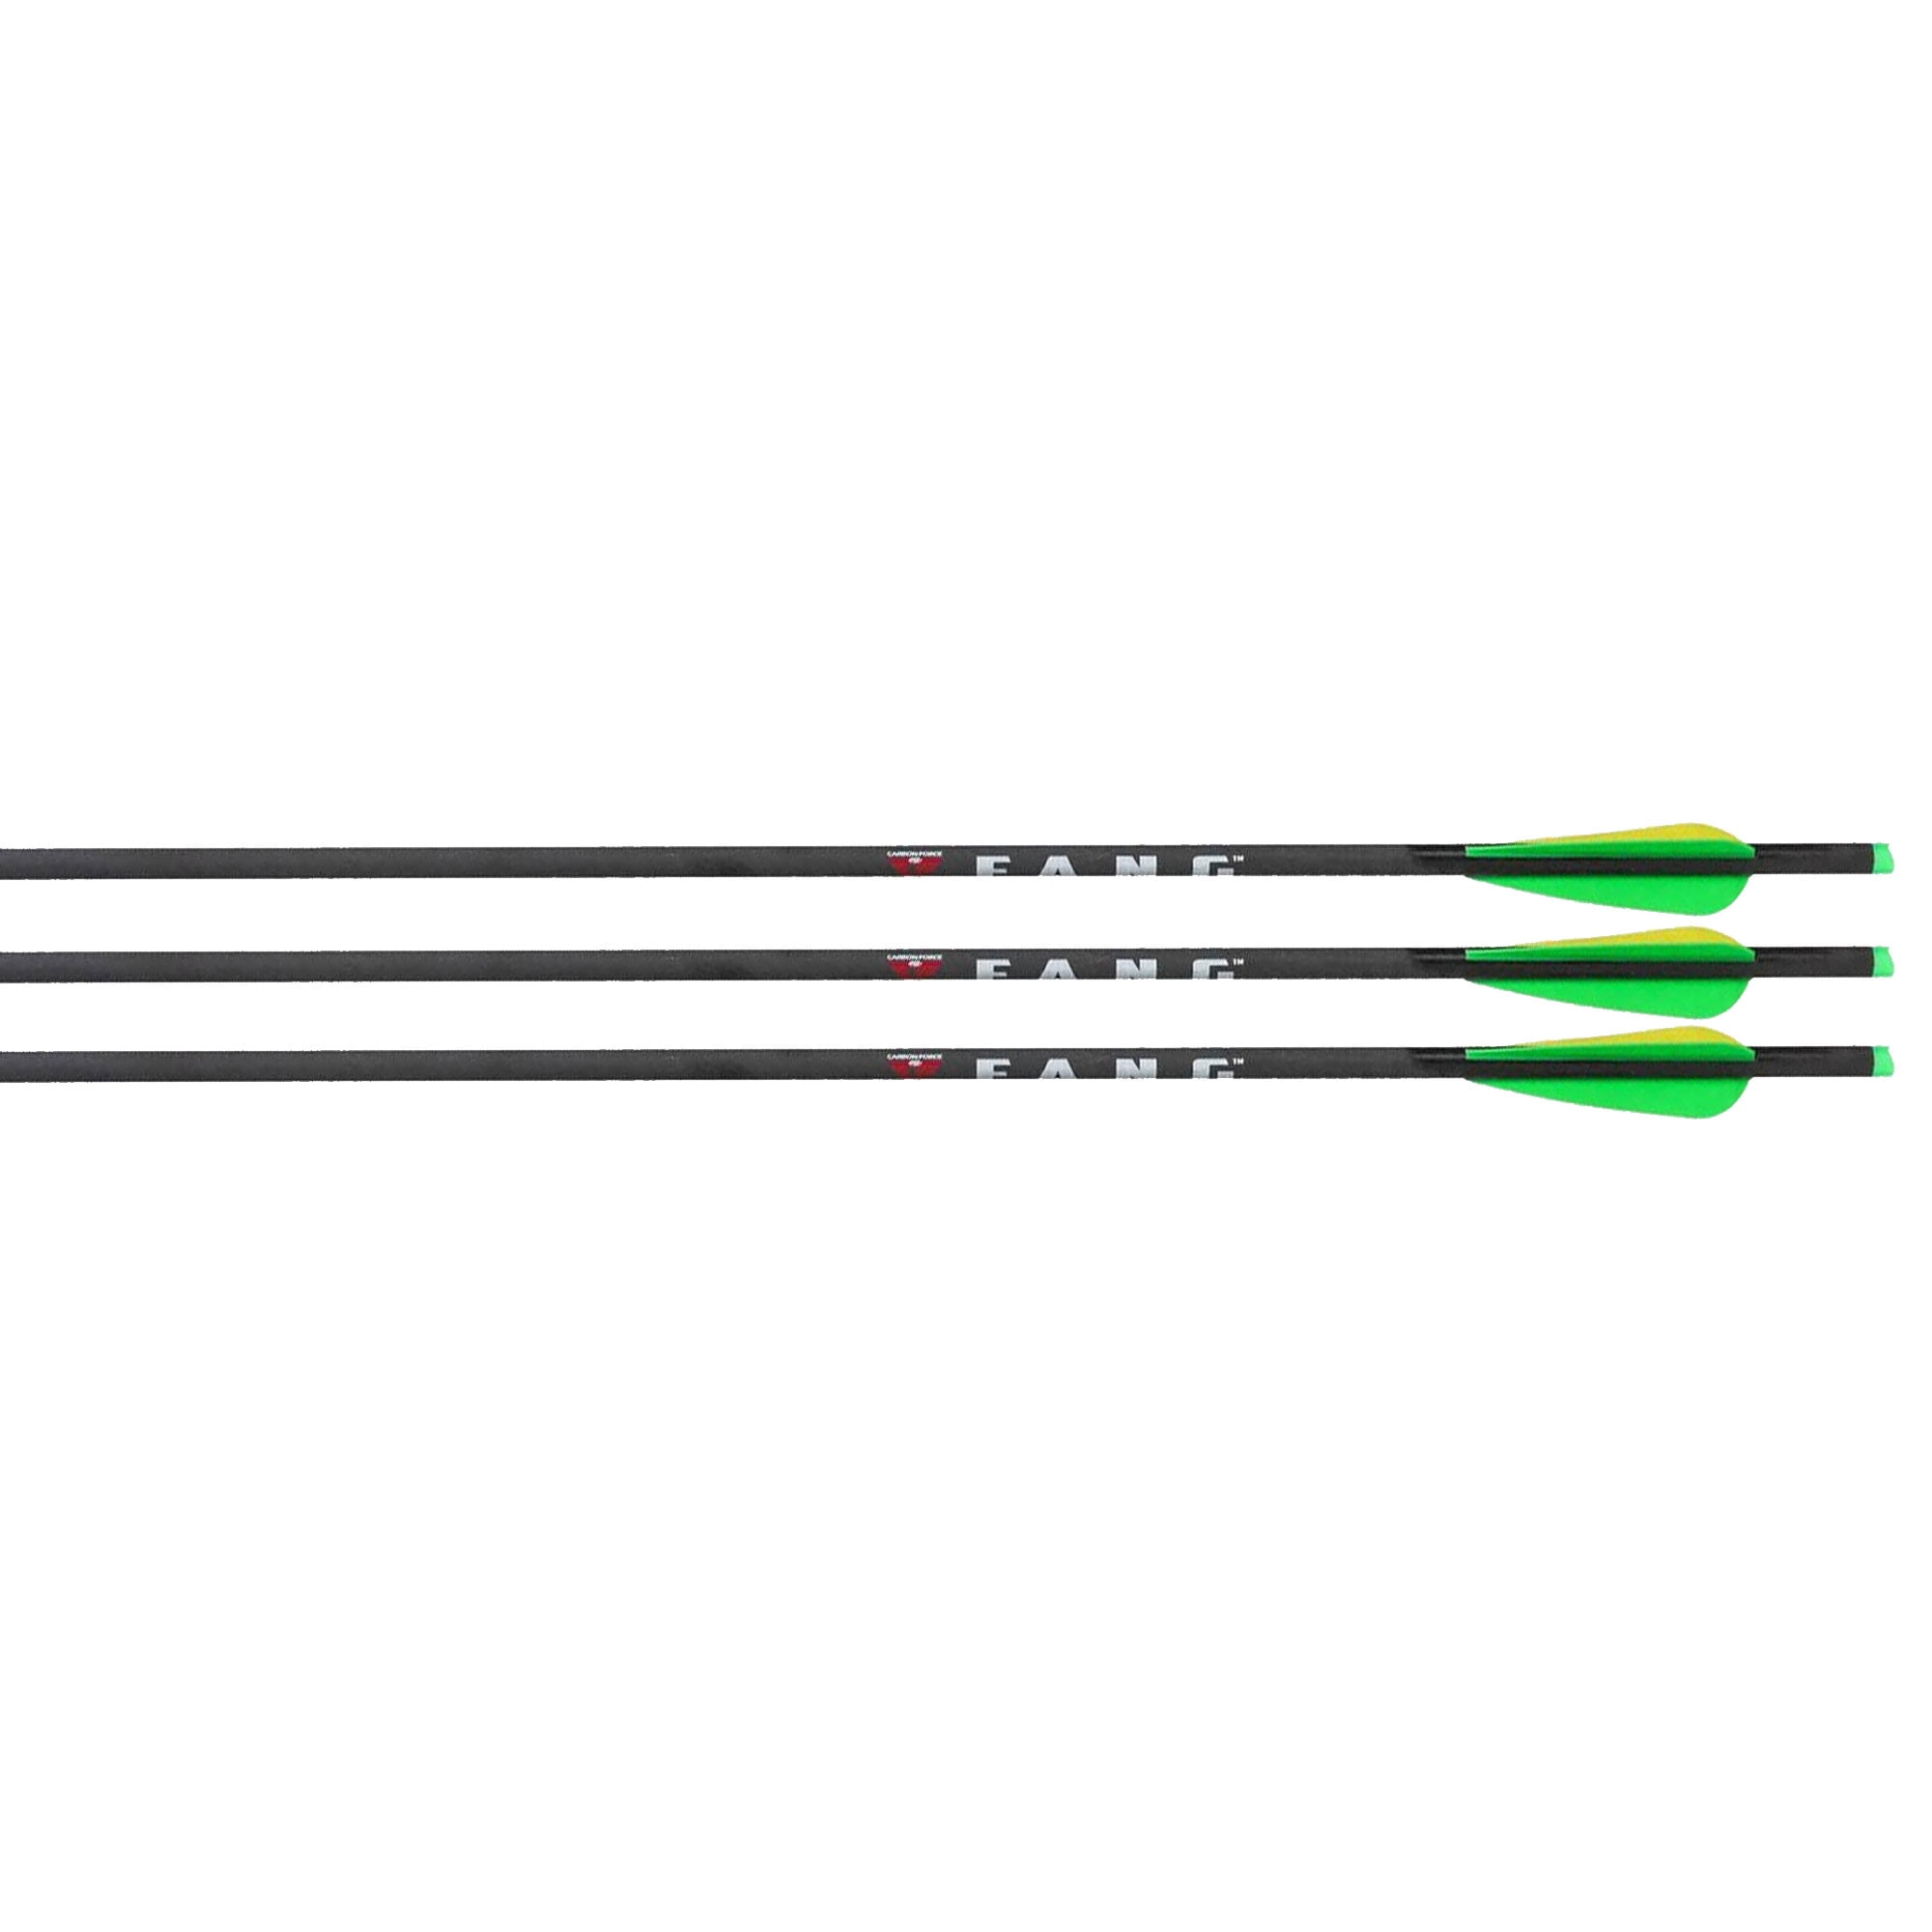 3 NEW 20 inch Bolts with Green lighted half moon nocks plus free target tips 